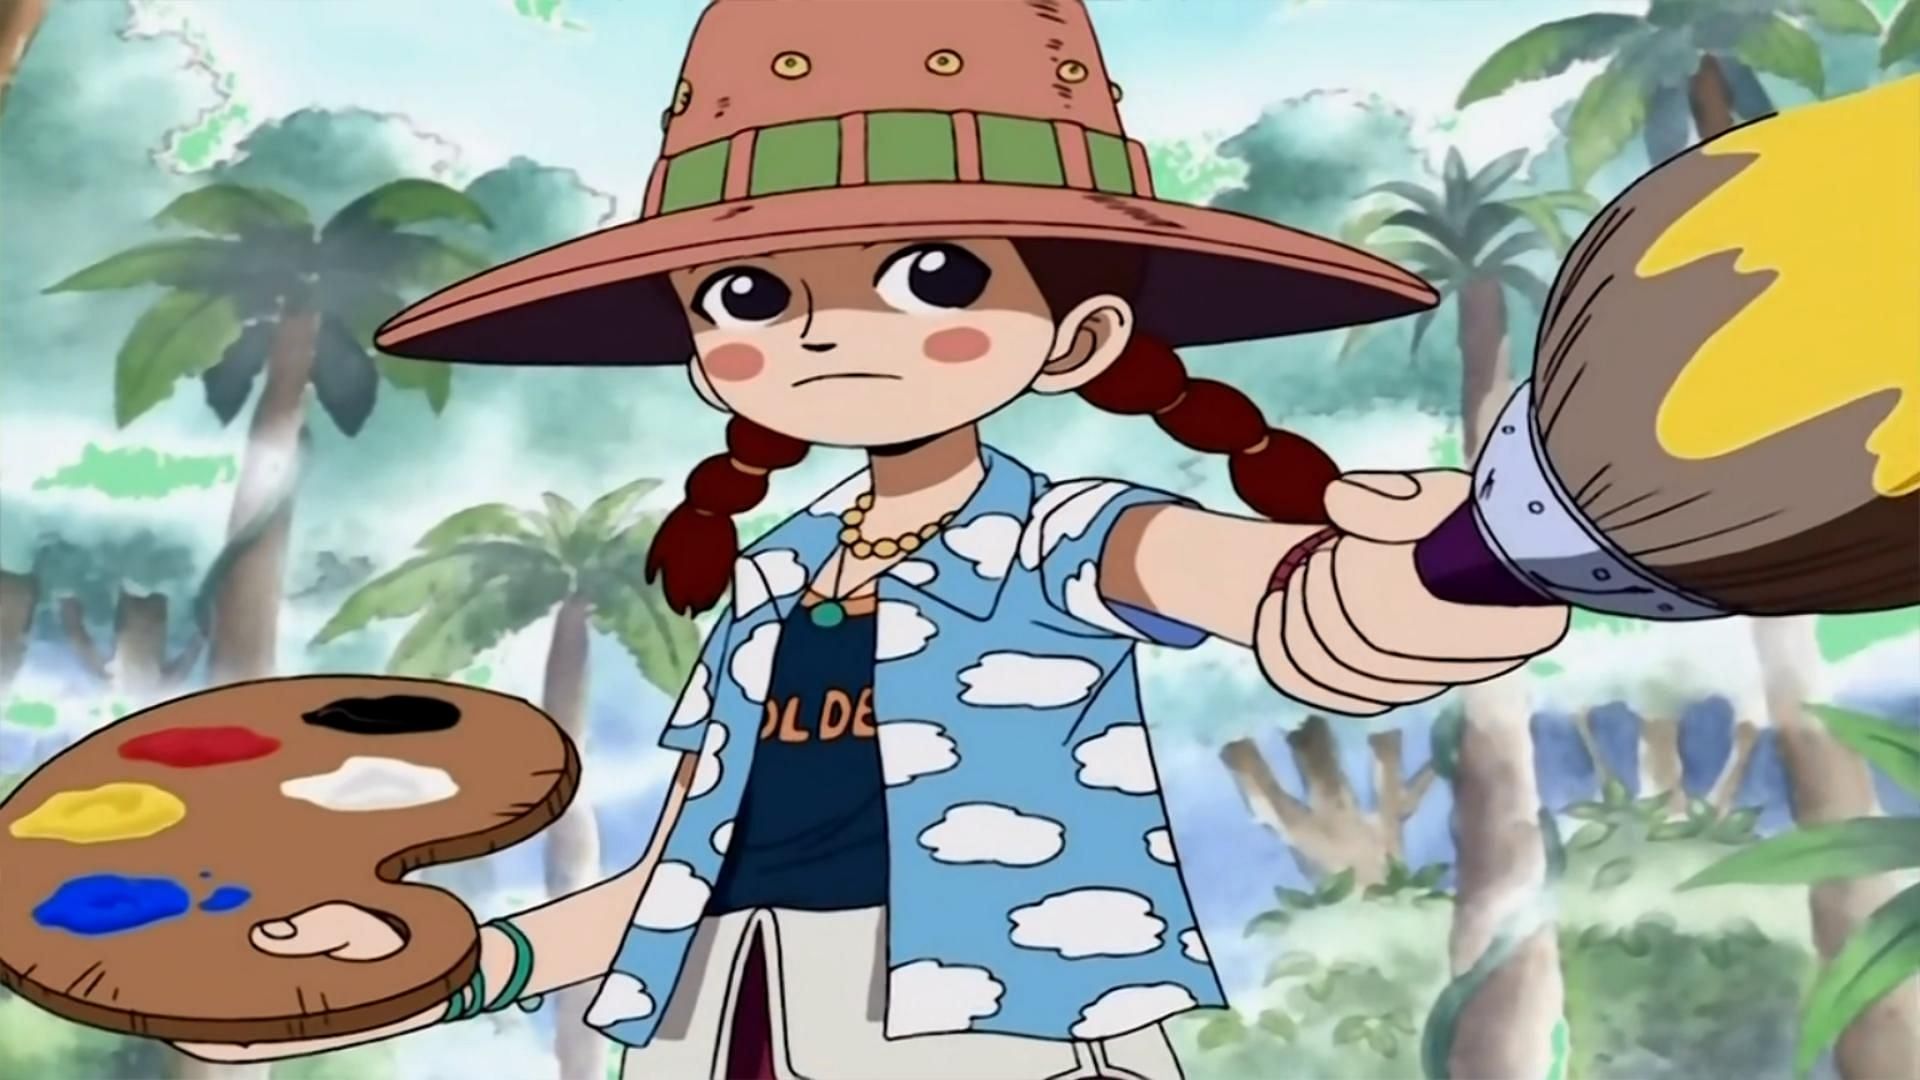 Miss Goldenweek as seen in One Piece (Image via Toei Animation)